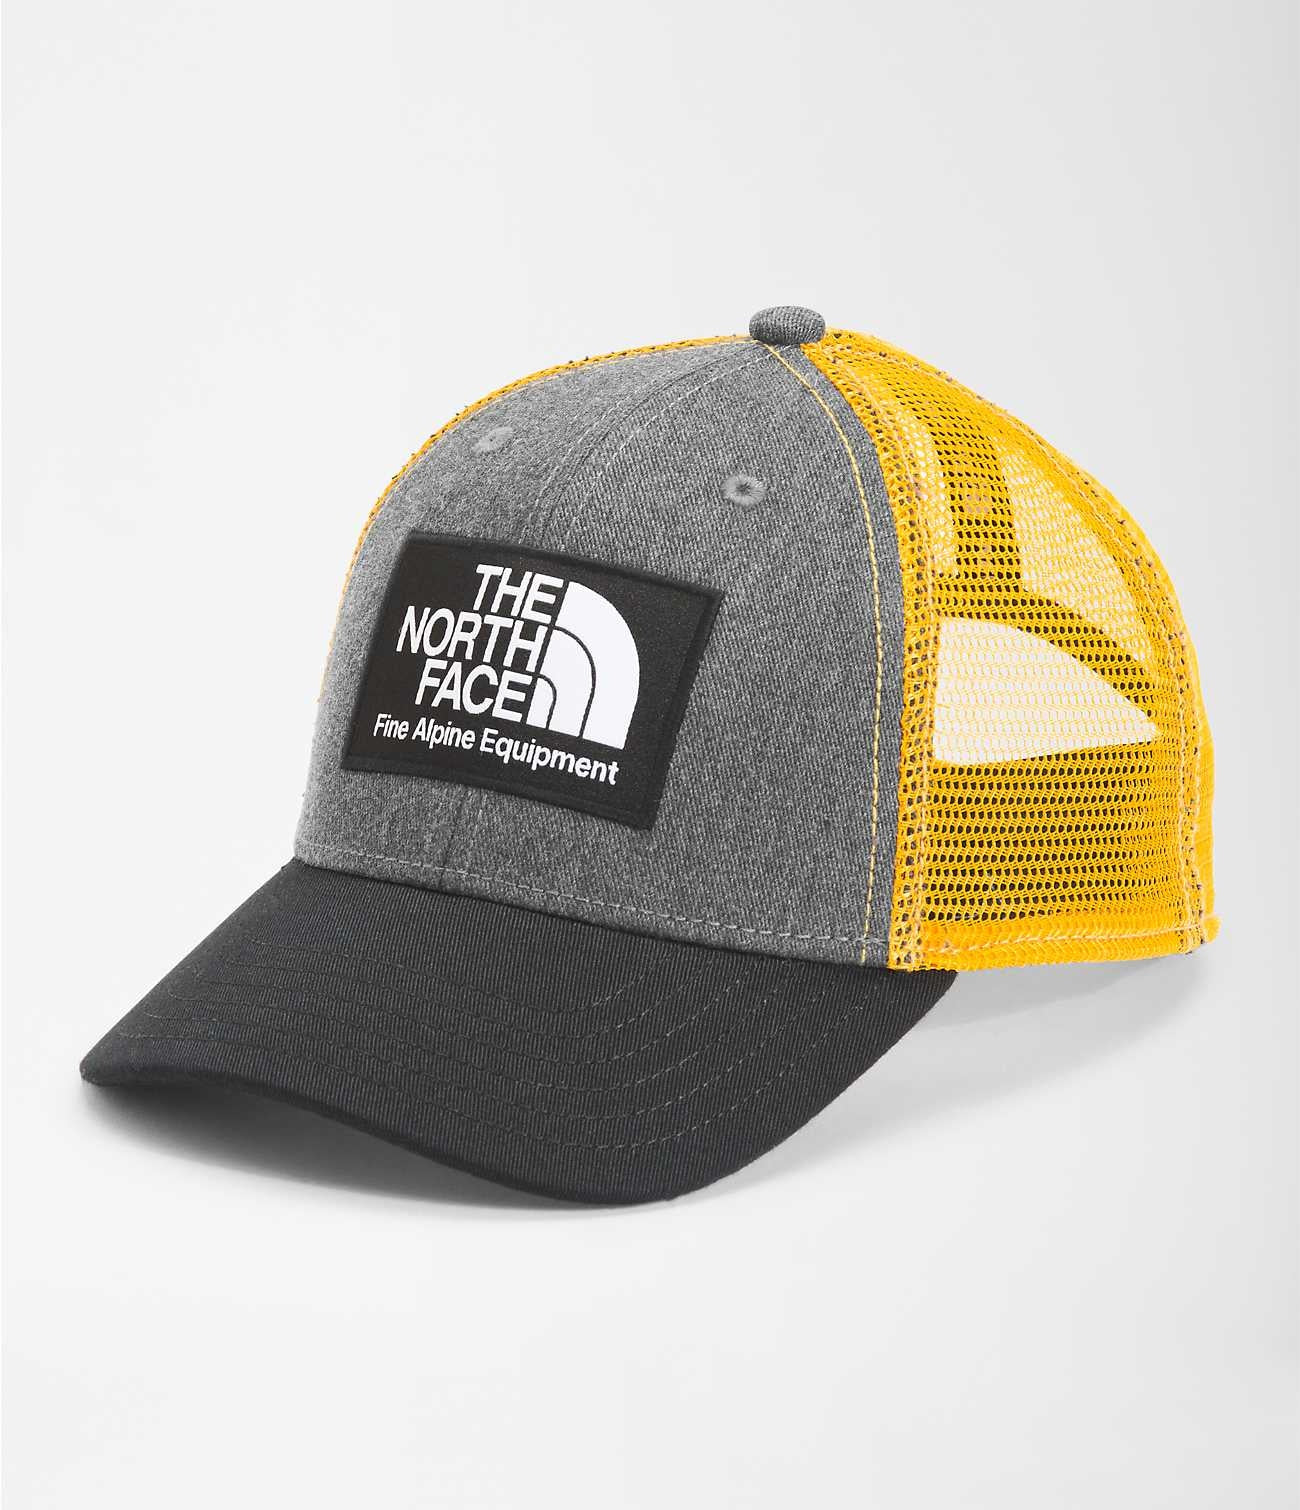 Youth Mudder Trucker Village Ski Hut The North Face Hats/Toques/Face, softgoods accessories, Spring 2022